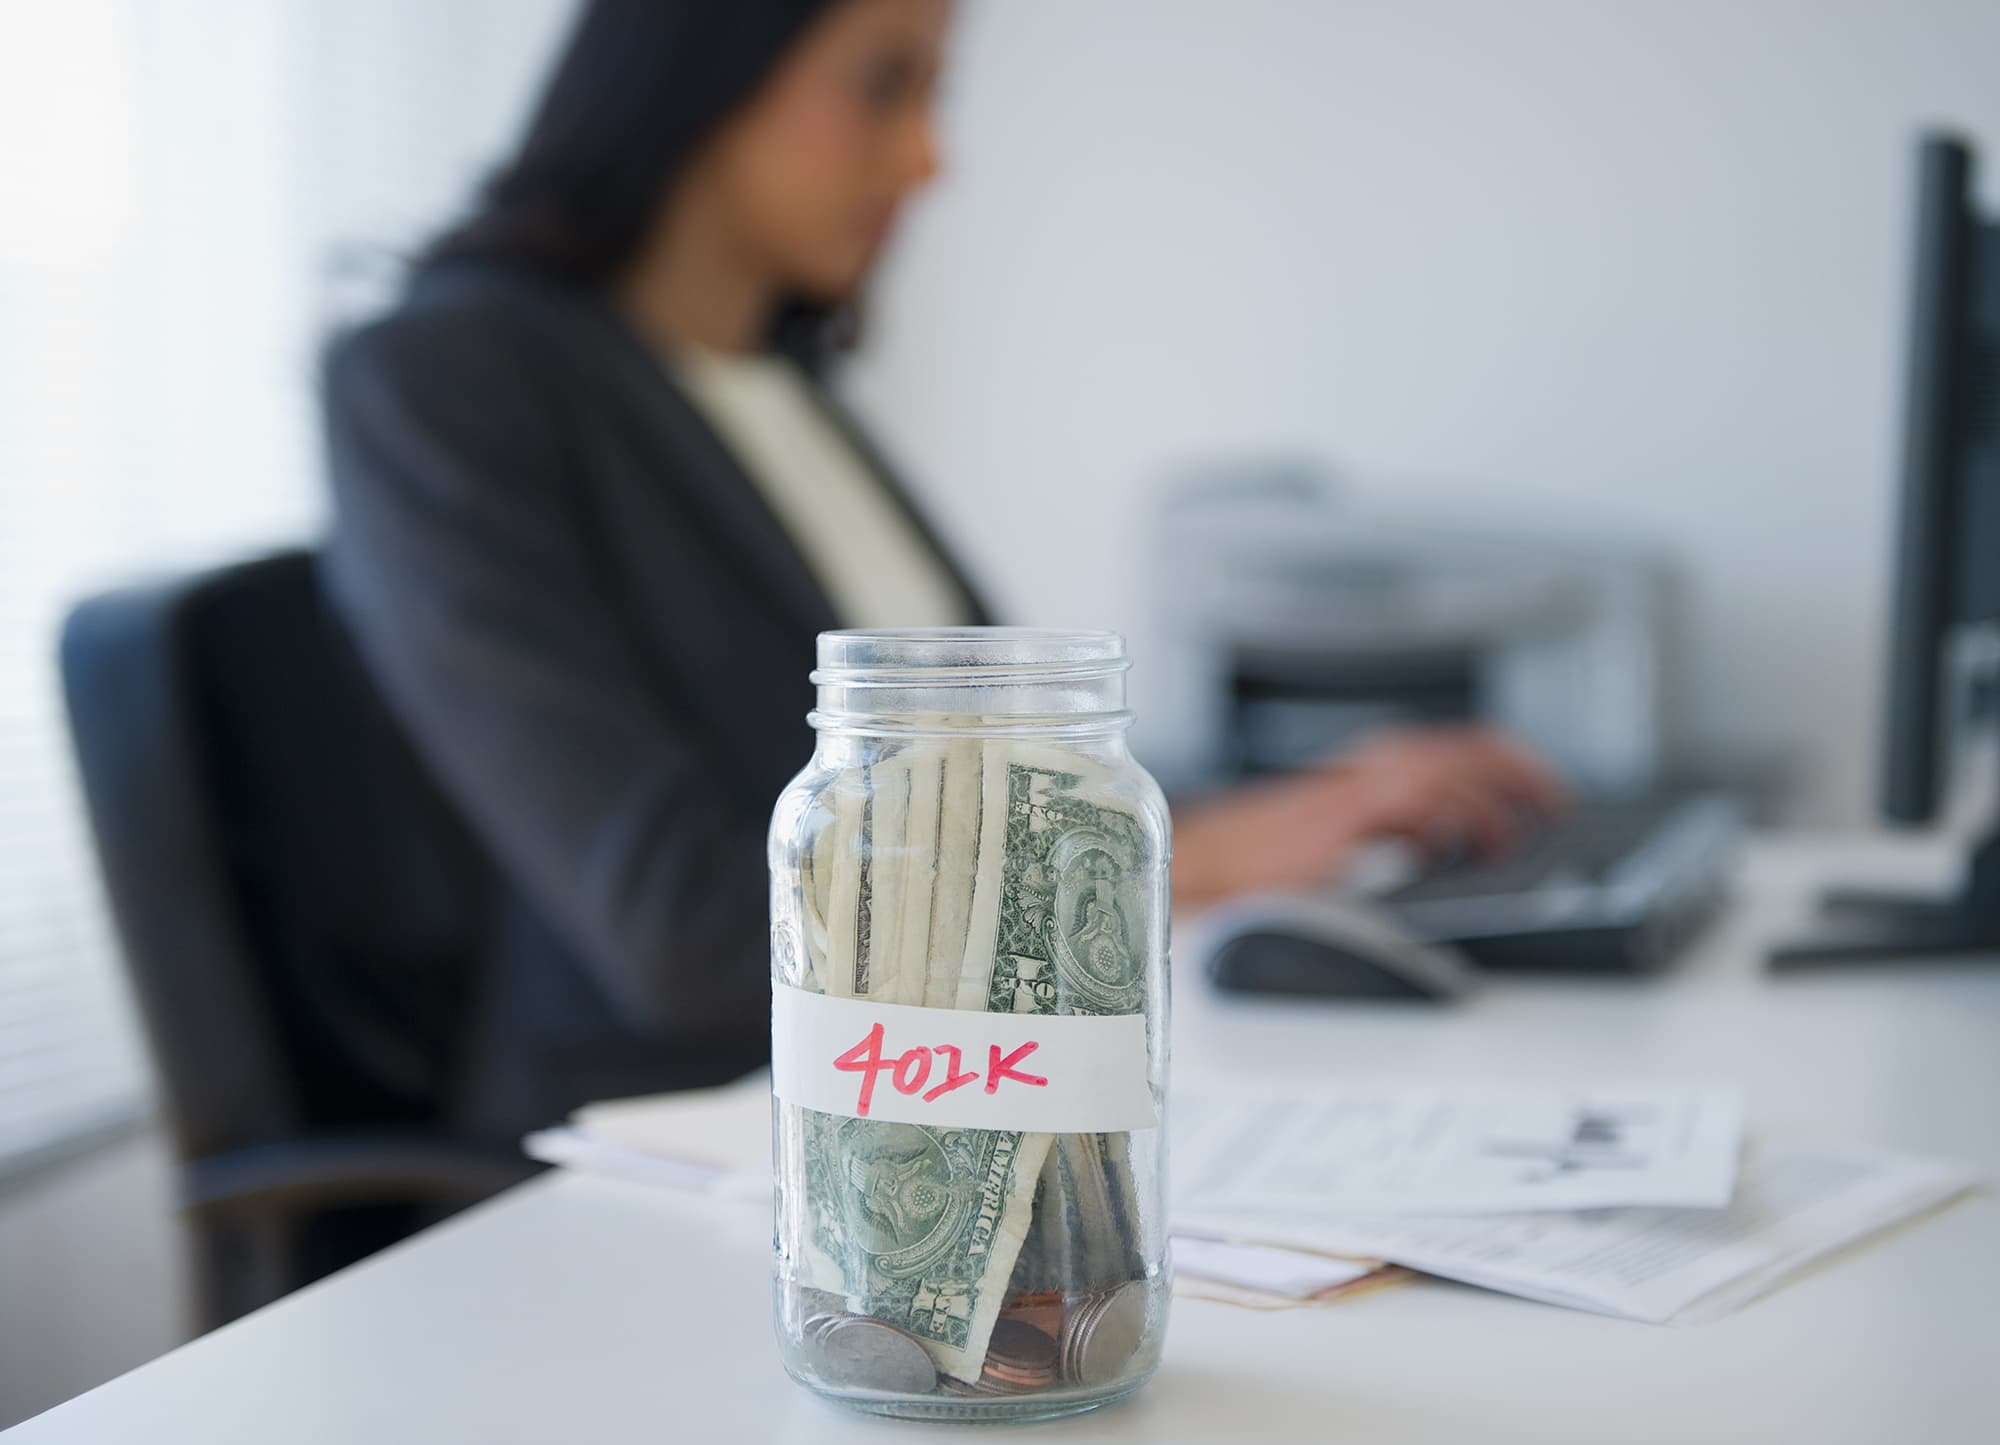 Employers may drop 401(k) matches as companies look to cut expenses